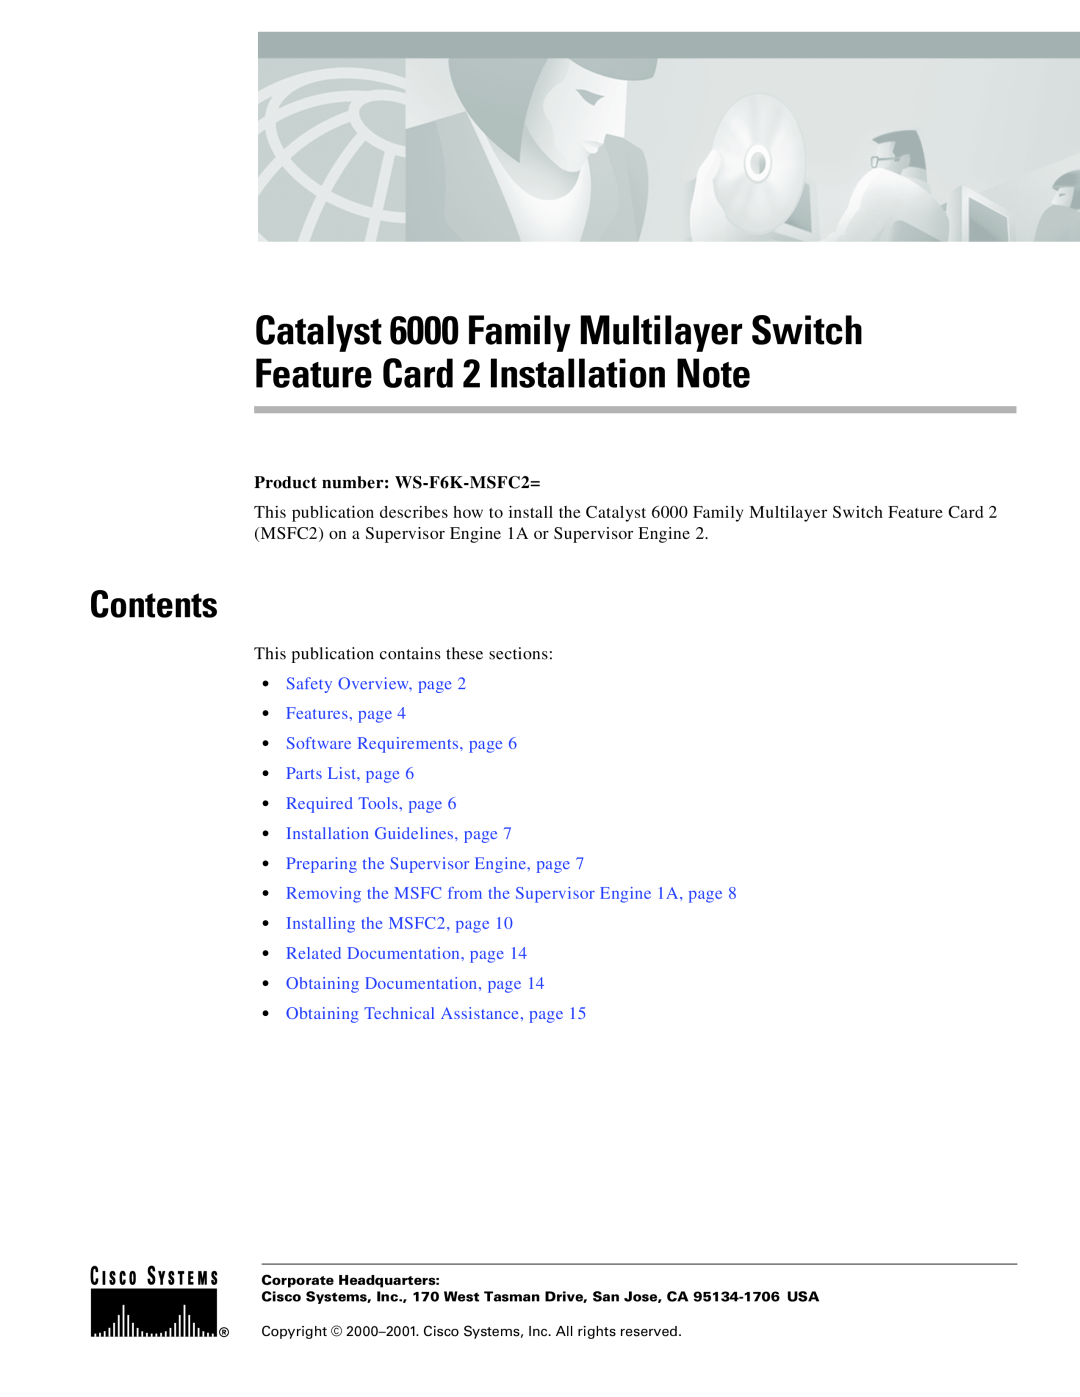 Cisco Systems WS-F6K-MSFC2 manual Contents, Catalyst 6000 Family Multilayer Switch, Feature Card 2 Installation Note 